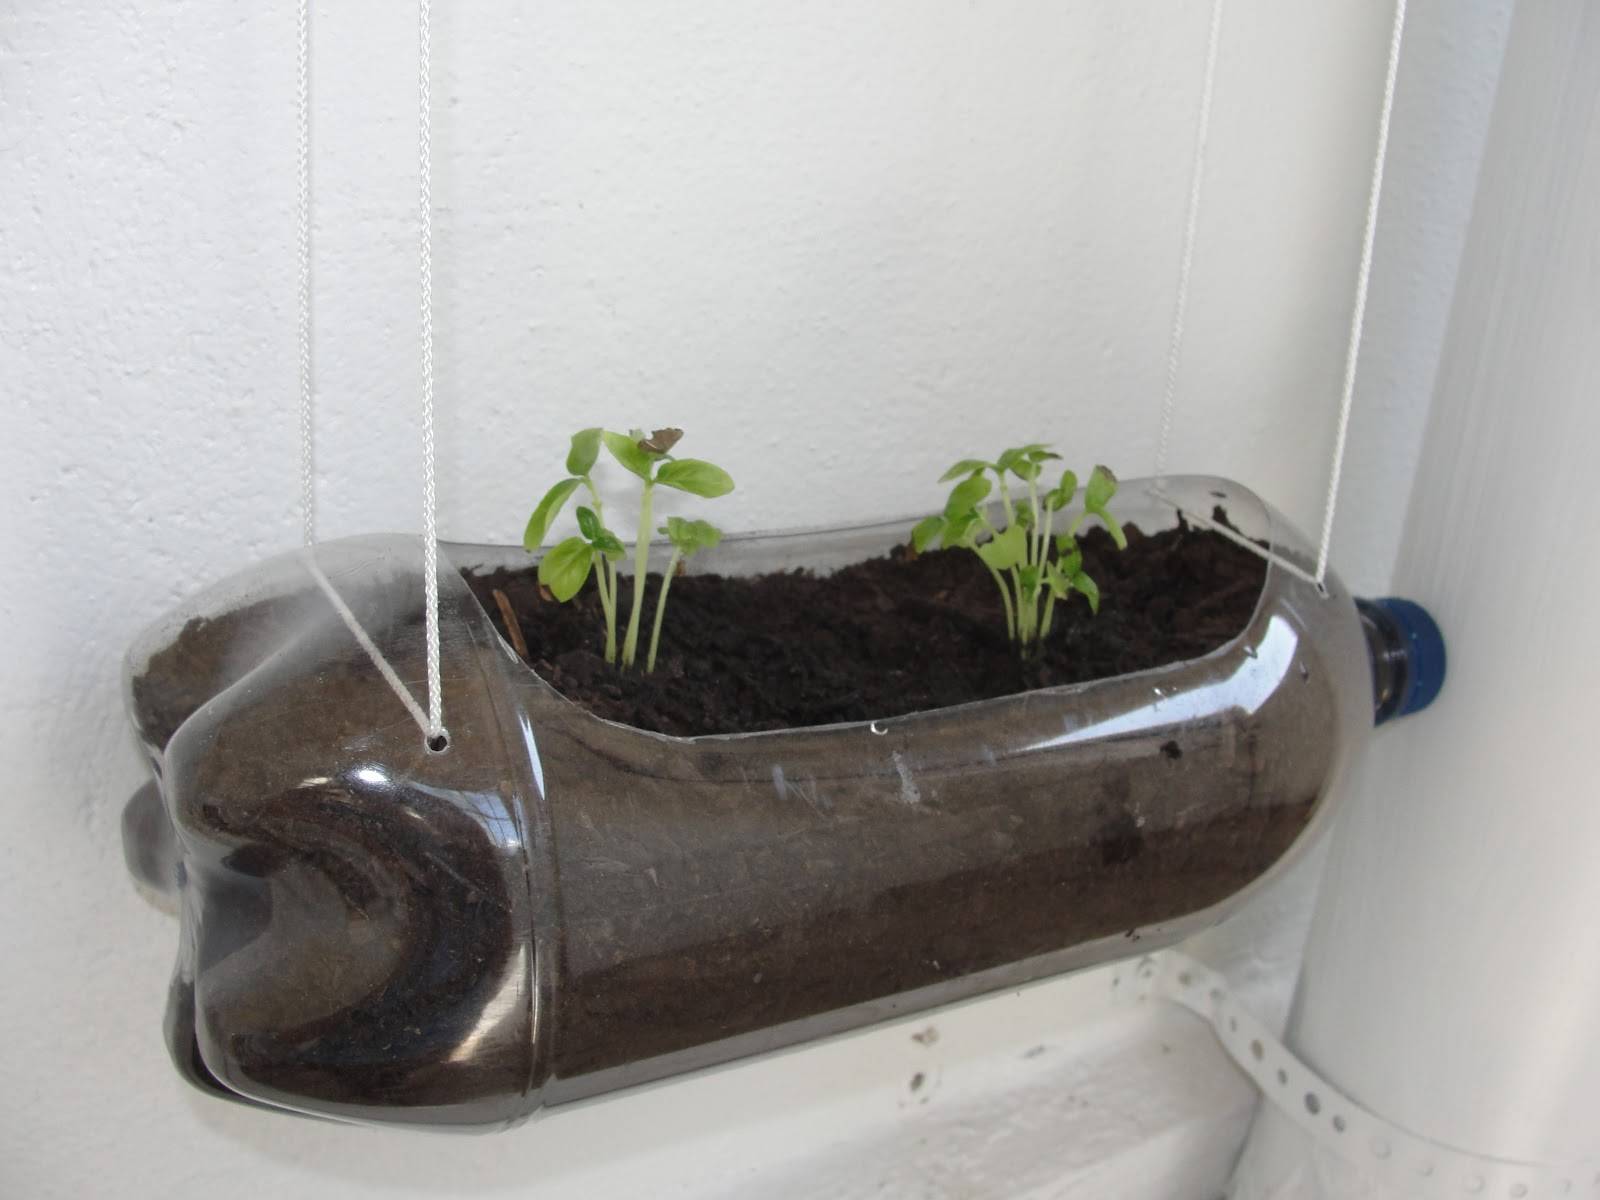 A Selfwatering Seed